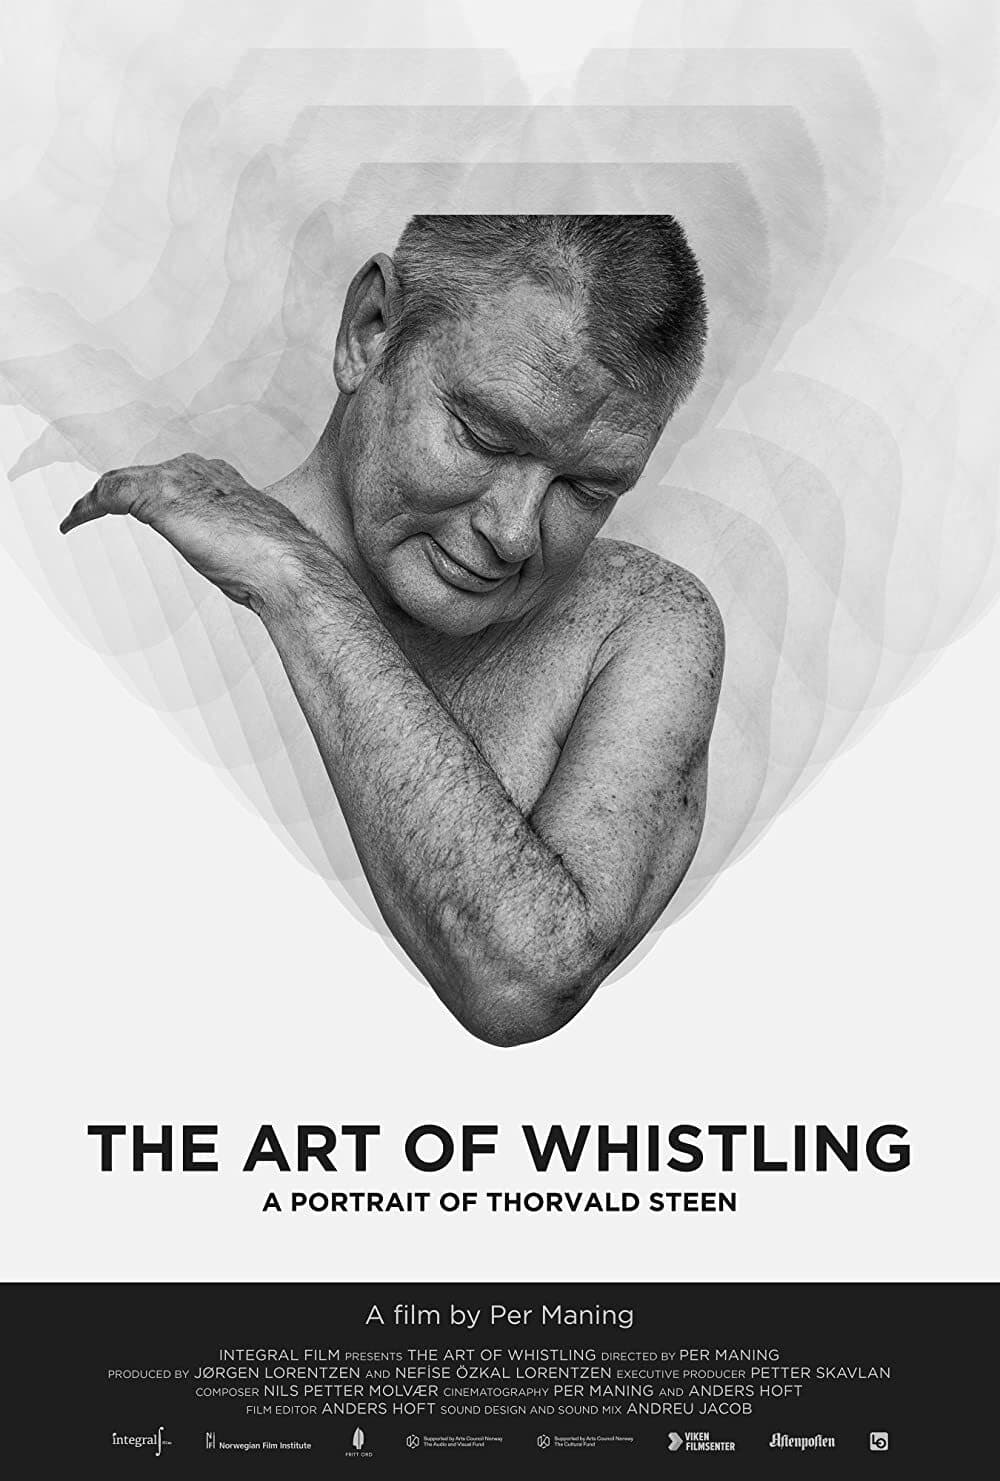 The Art of Whistling